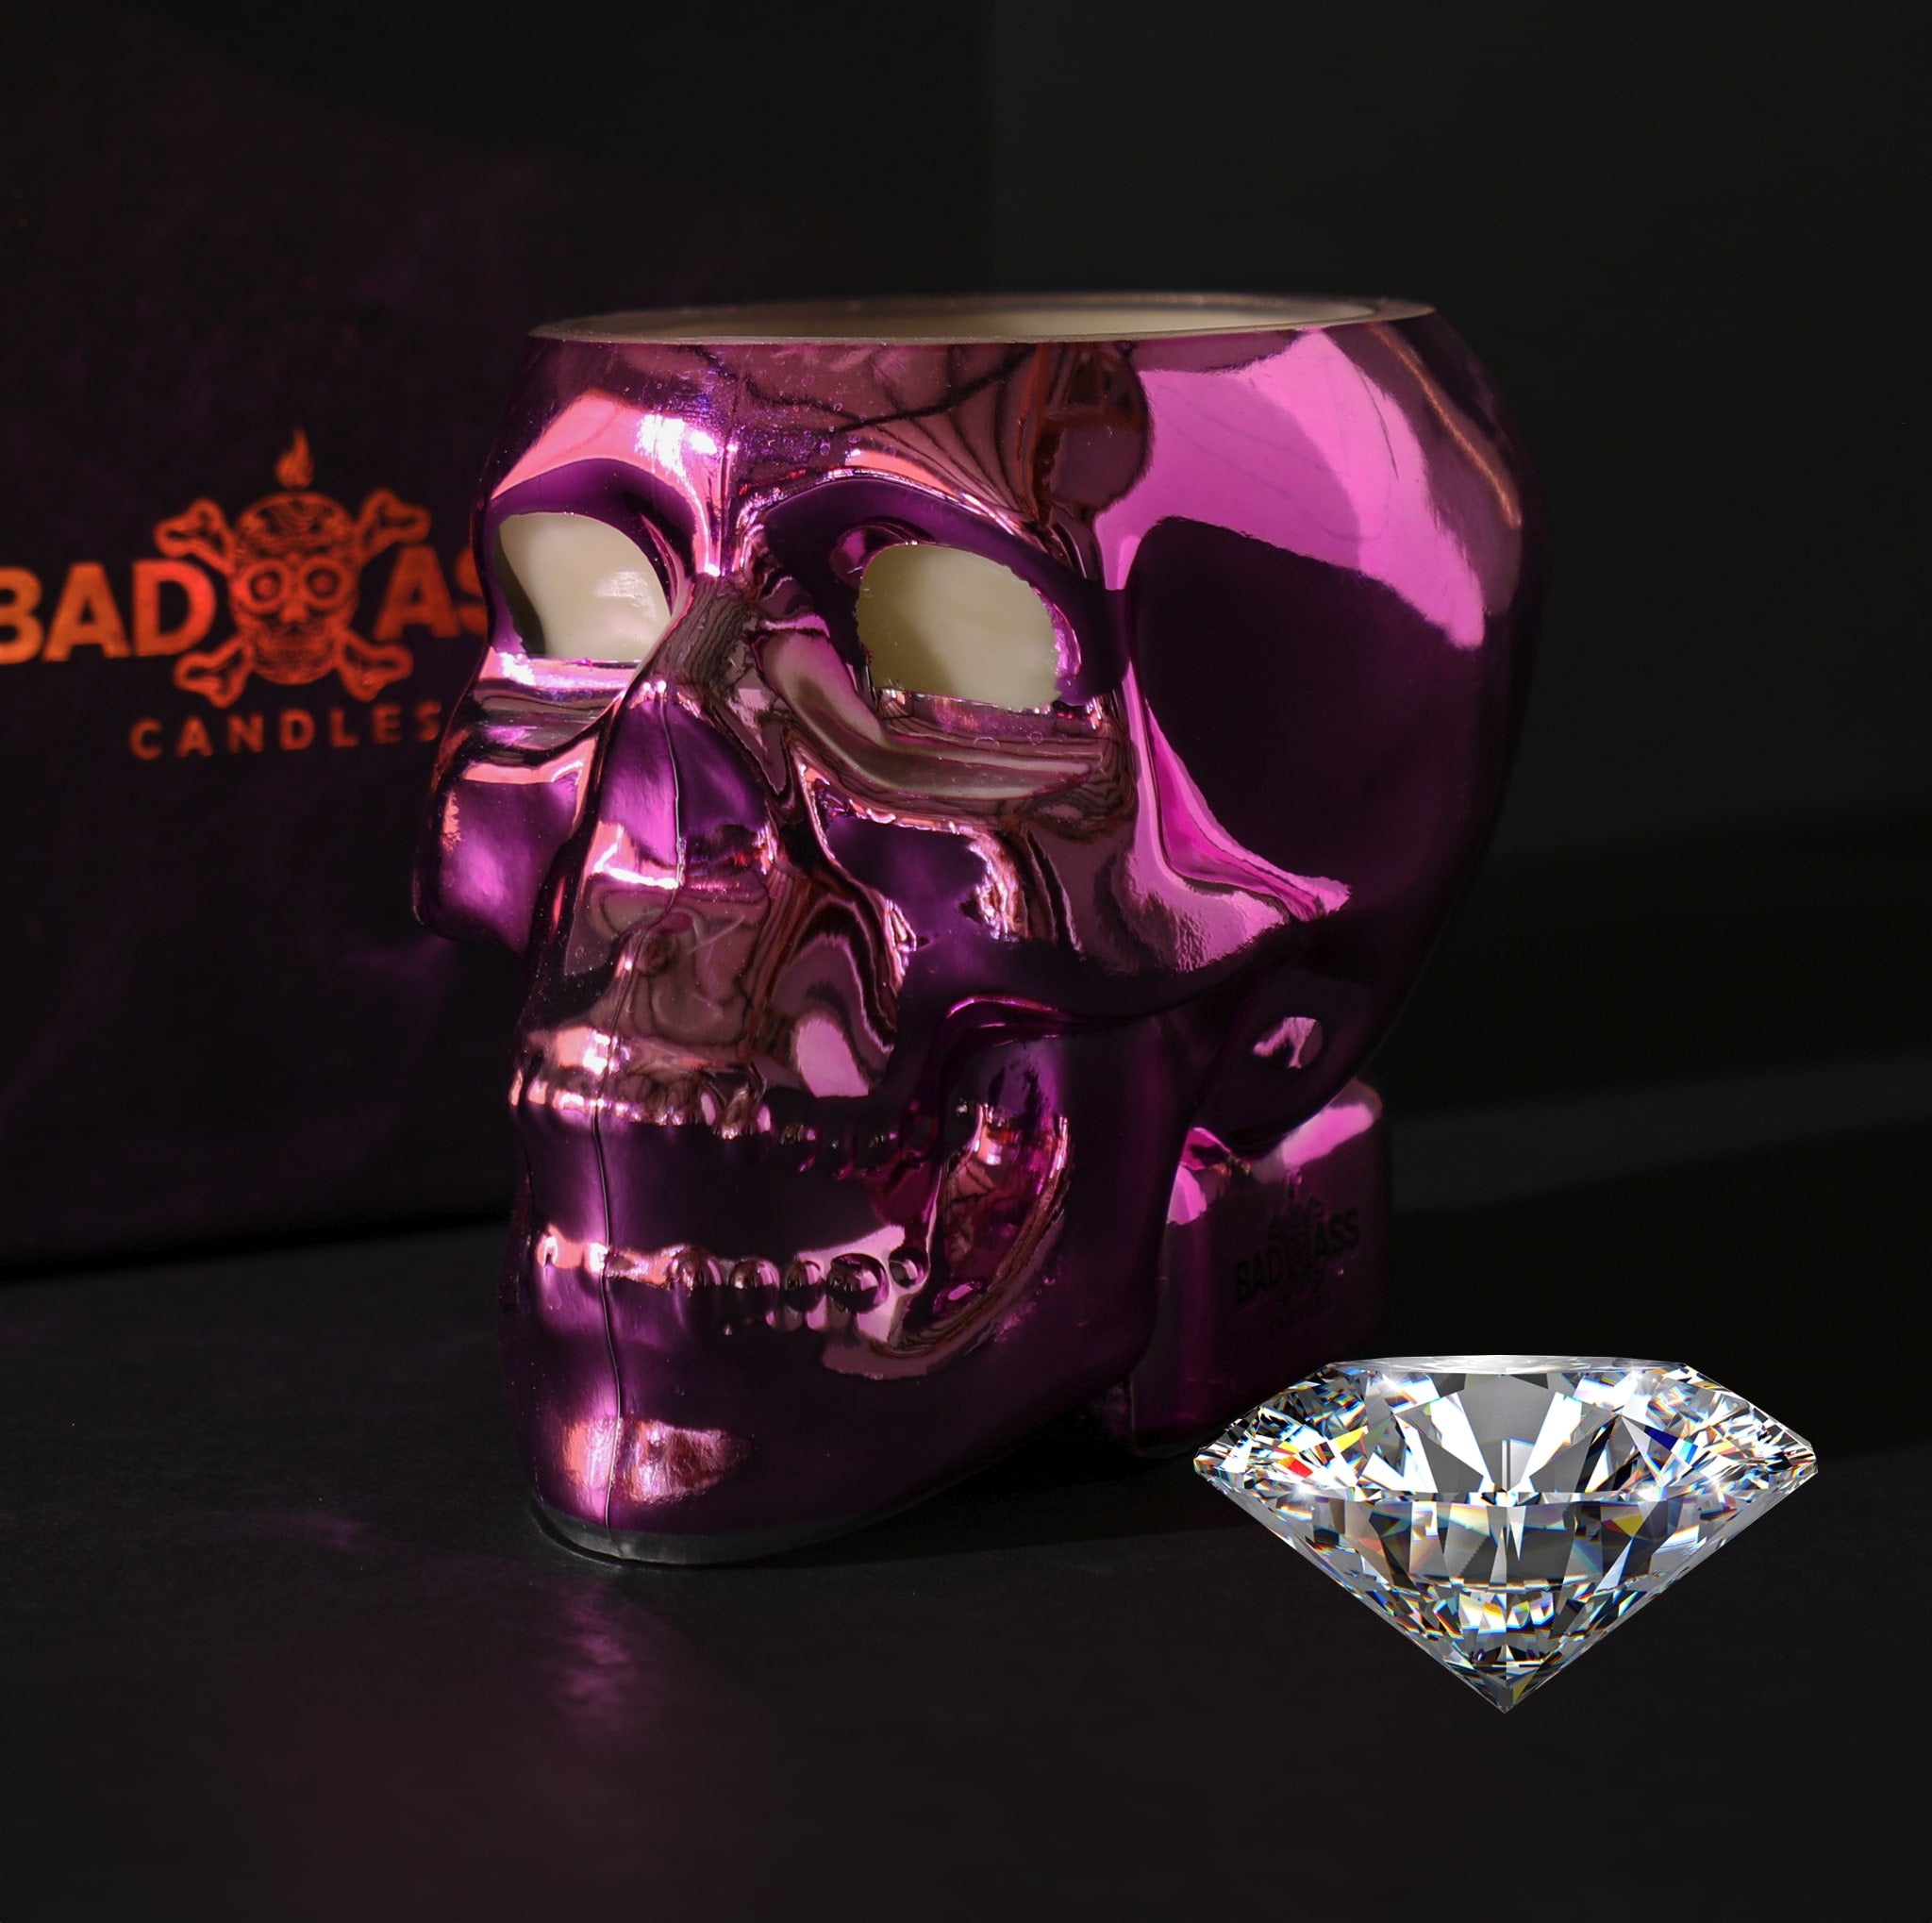 Glam Pink Skull Diamond Candle by Badass Candles